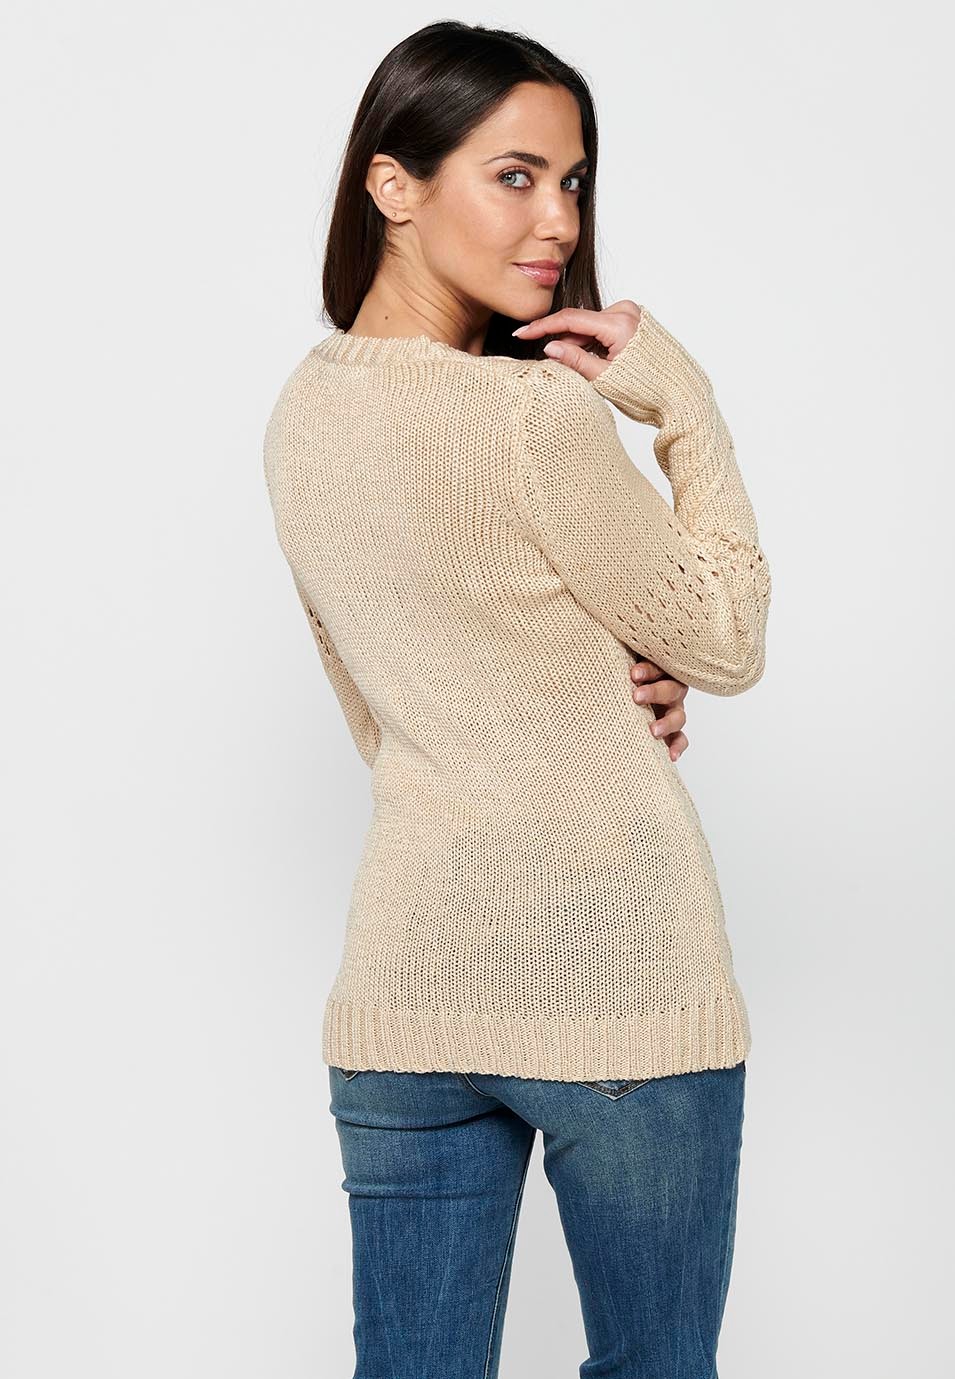 Long sleeve sweater with round neck. Beige Openwork Front Tricot for Women 8